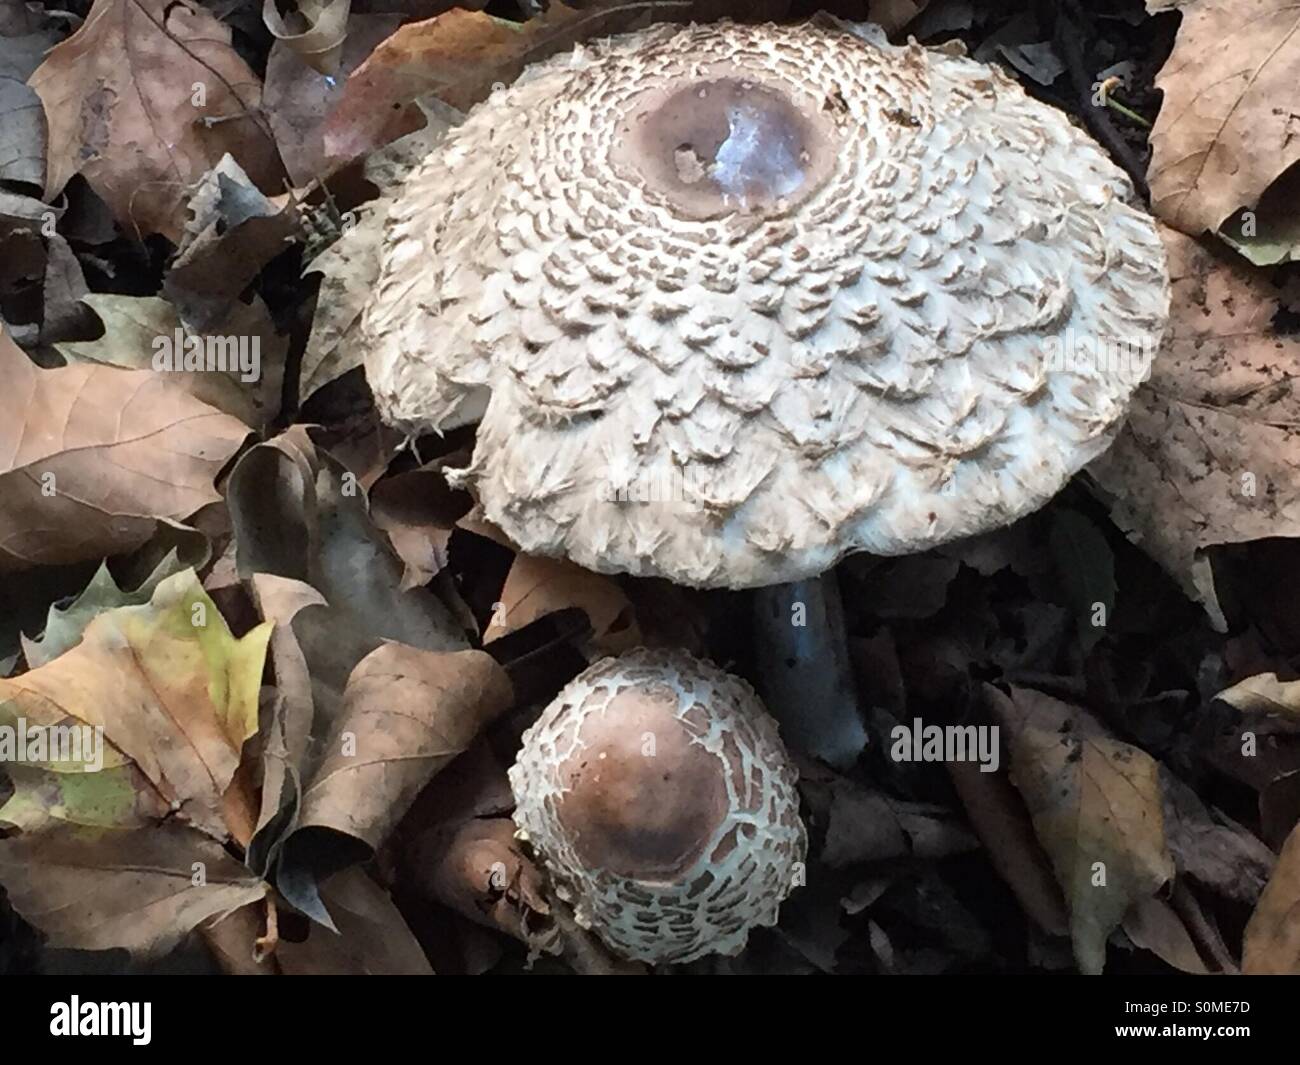 Wild fungi mushrooms growing amongst the Autumn leaves in Southern England October 2015. Stock Photo